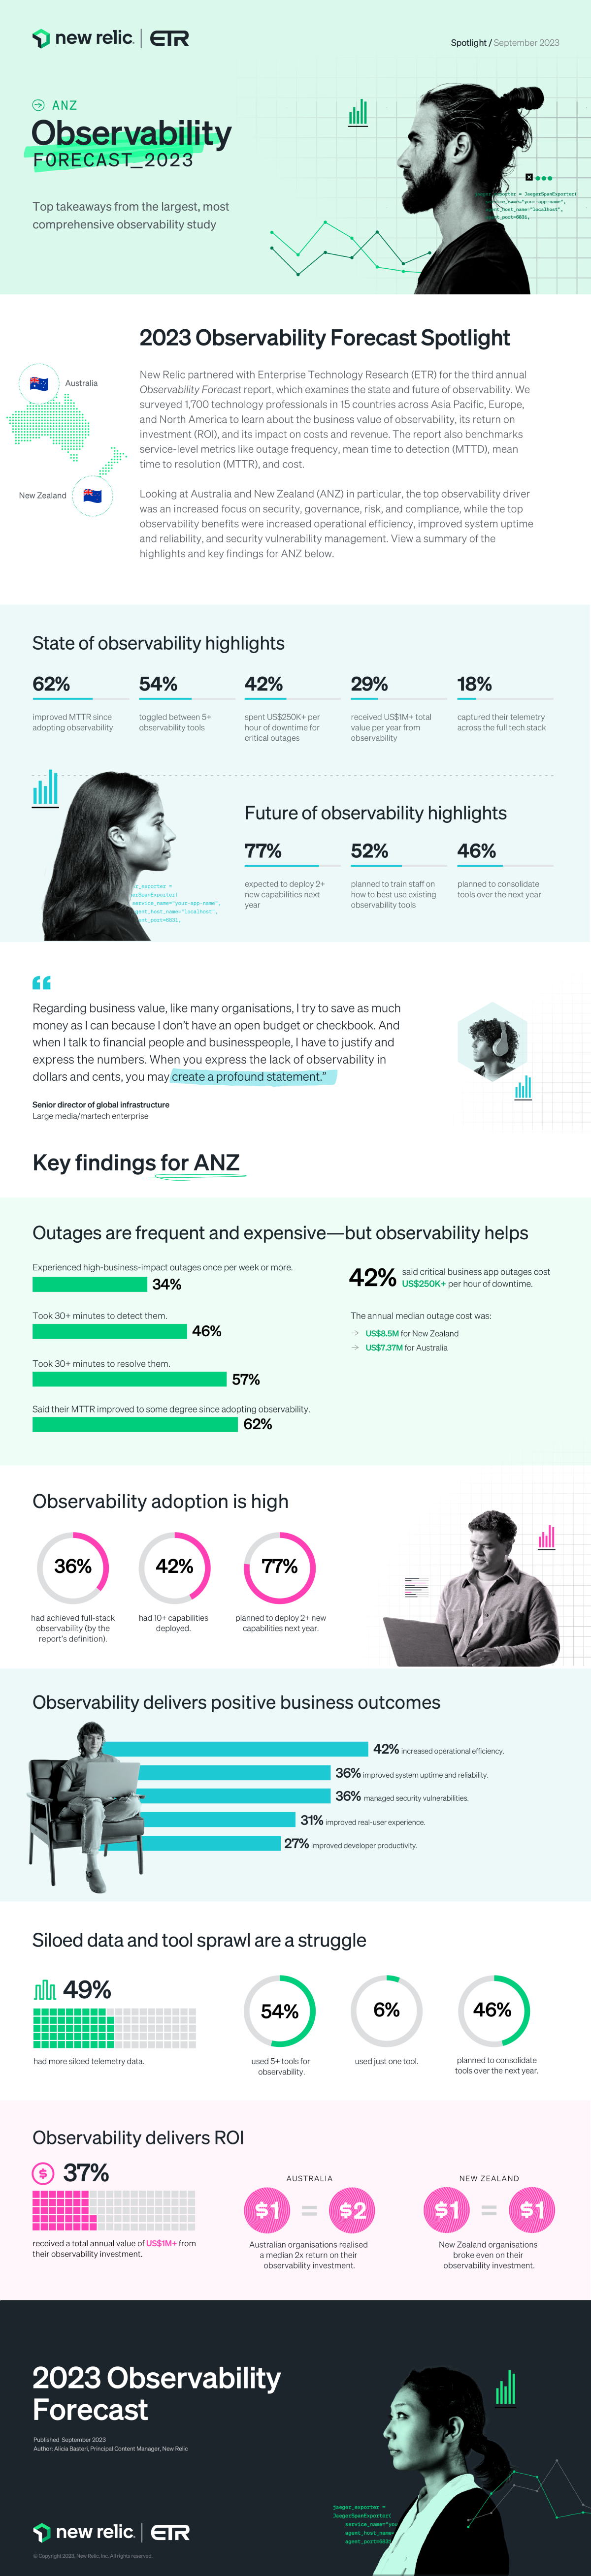 New Relic observability forecast infographic ANZ